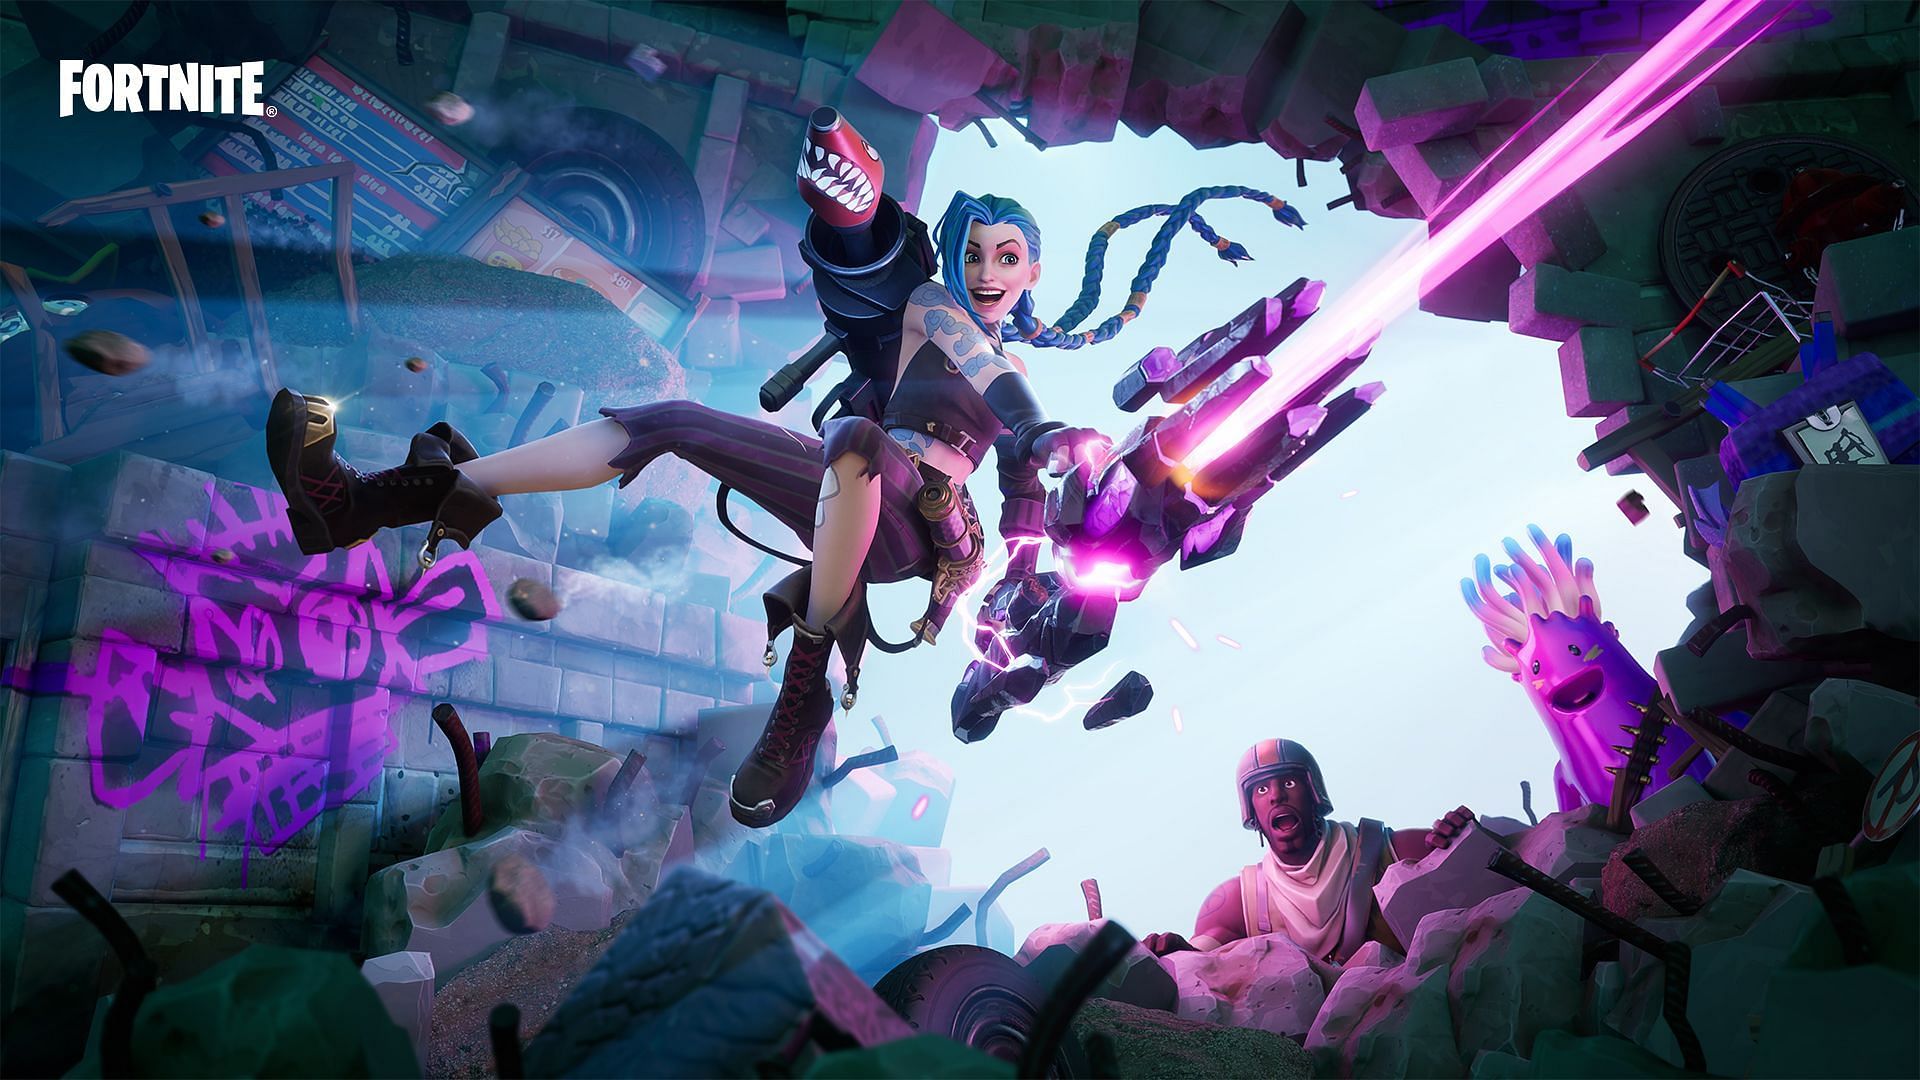 The Fortnite Jinx loading screen may have revealed the probable return of the Aerial Assault Trooper skin to the Item Shop (Image via Fortnite)